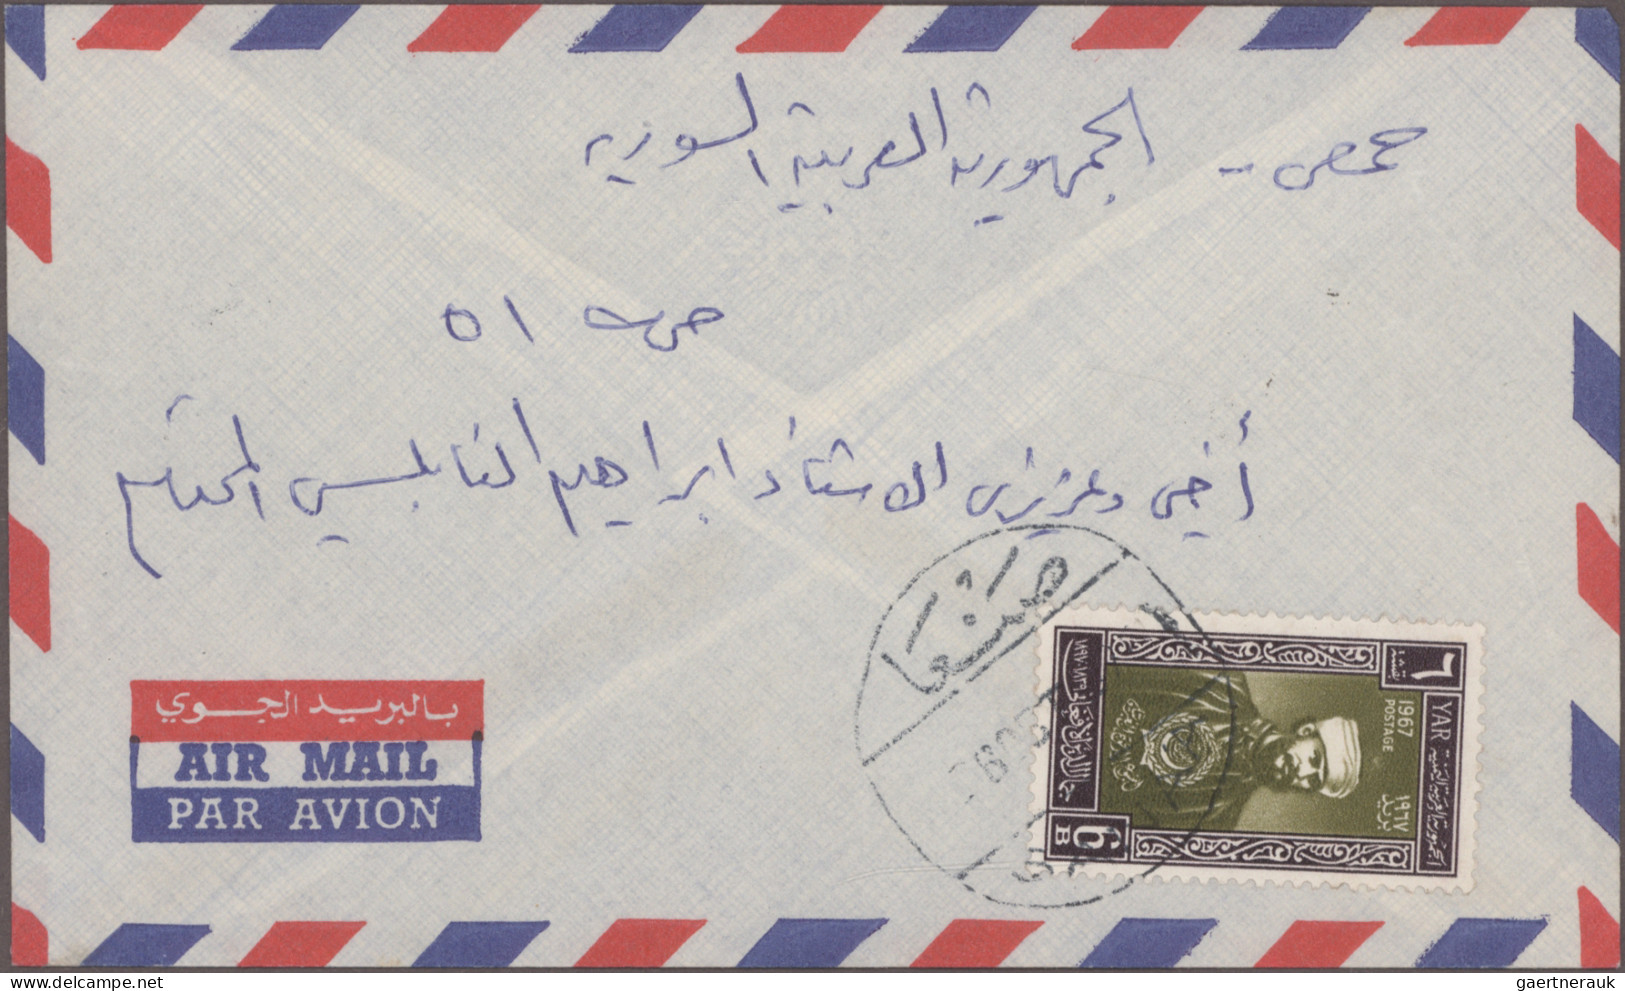 Yemen: 1968/1975, lot of 16 domestic commercial covers incl. registered mail, in